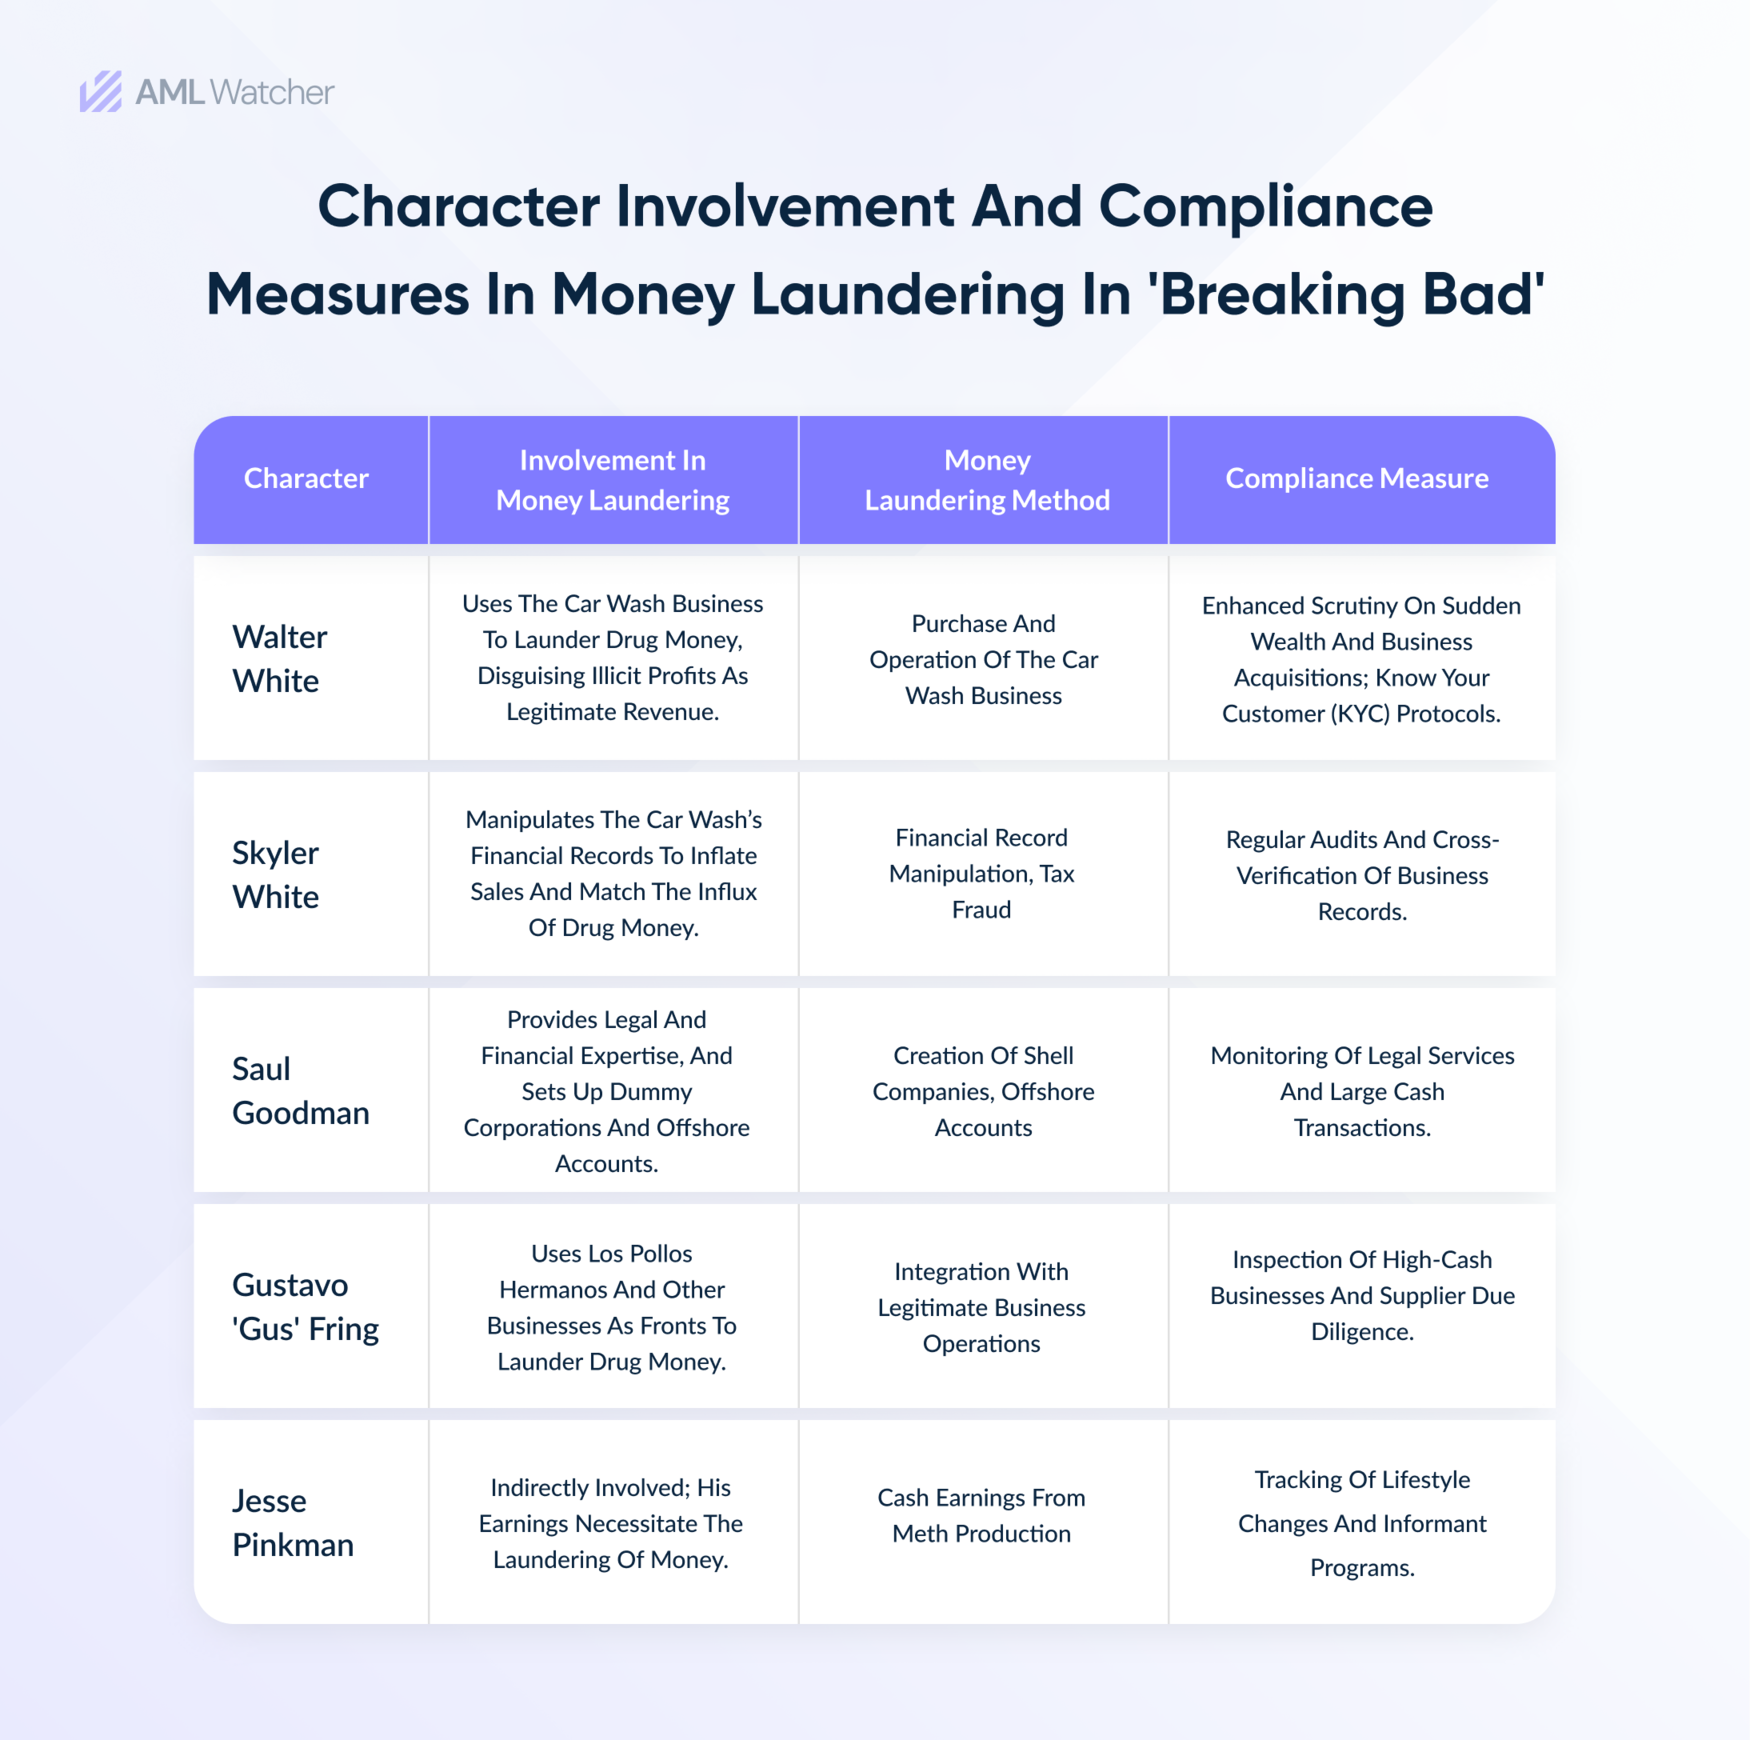 The featured image shows a detailed map of compliance measures, involvement in money laundering, and money laundering method used in the series ‘Breaking Bad’. 